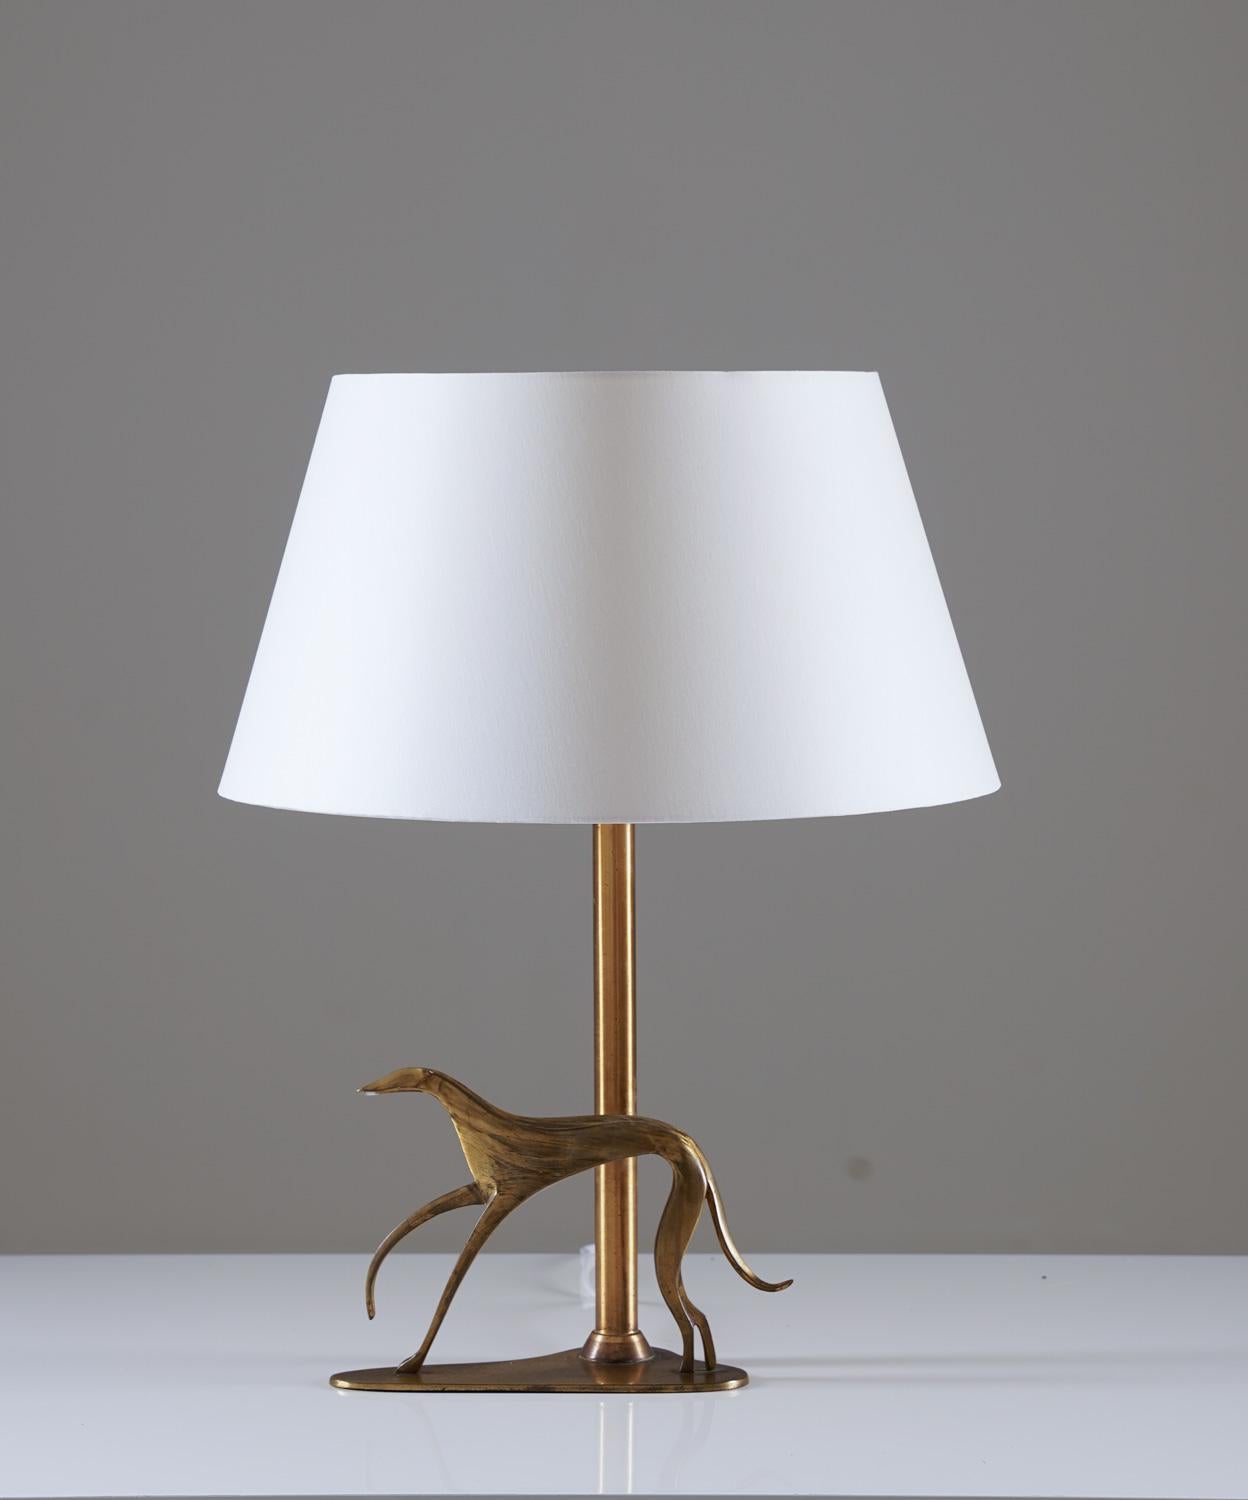 Rare table lamp in brass, most likely manufactured in Sweden circa 1930.
This elegant lamp rests on an organically shaped foot, holding the rod and an ornament in the shape of a dog. The lamp comes with a new high-quality shade in off-white satin